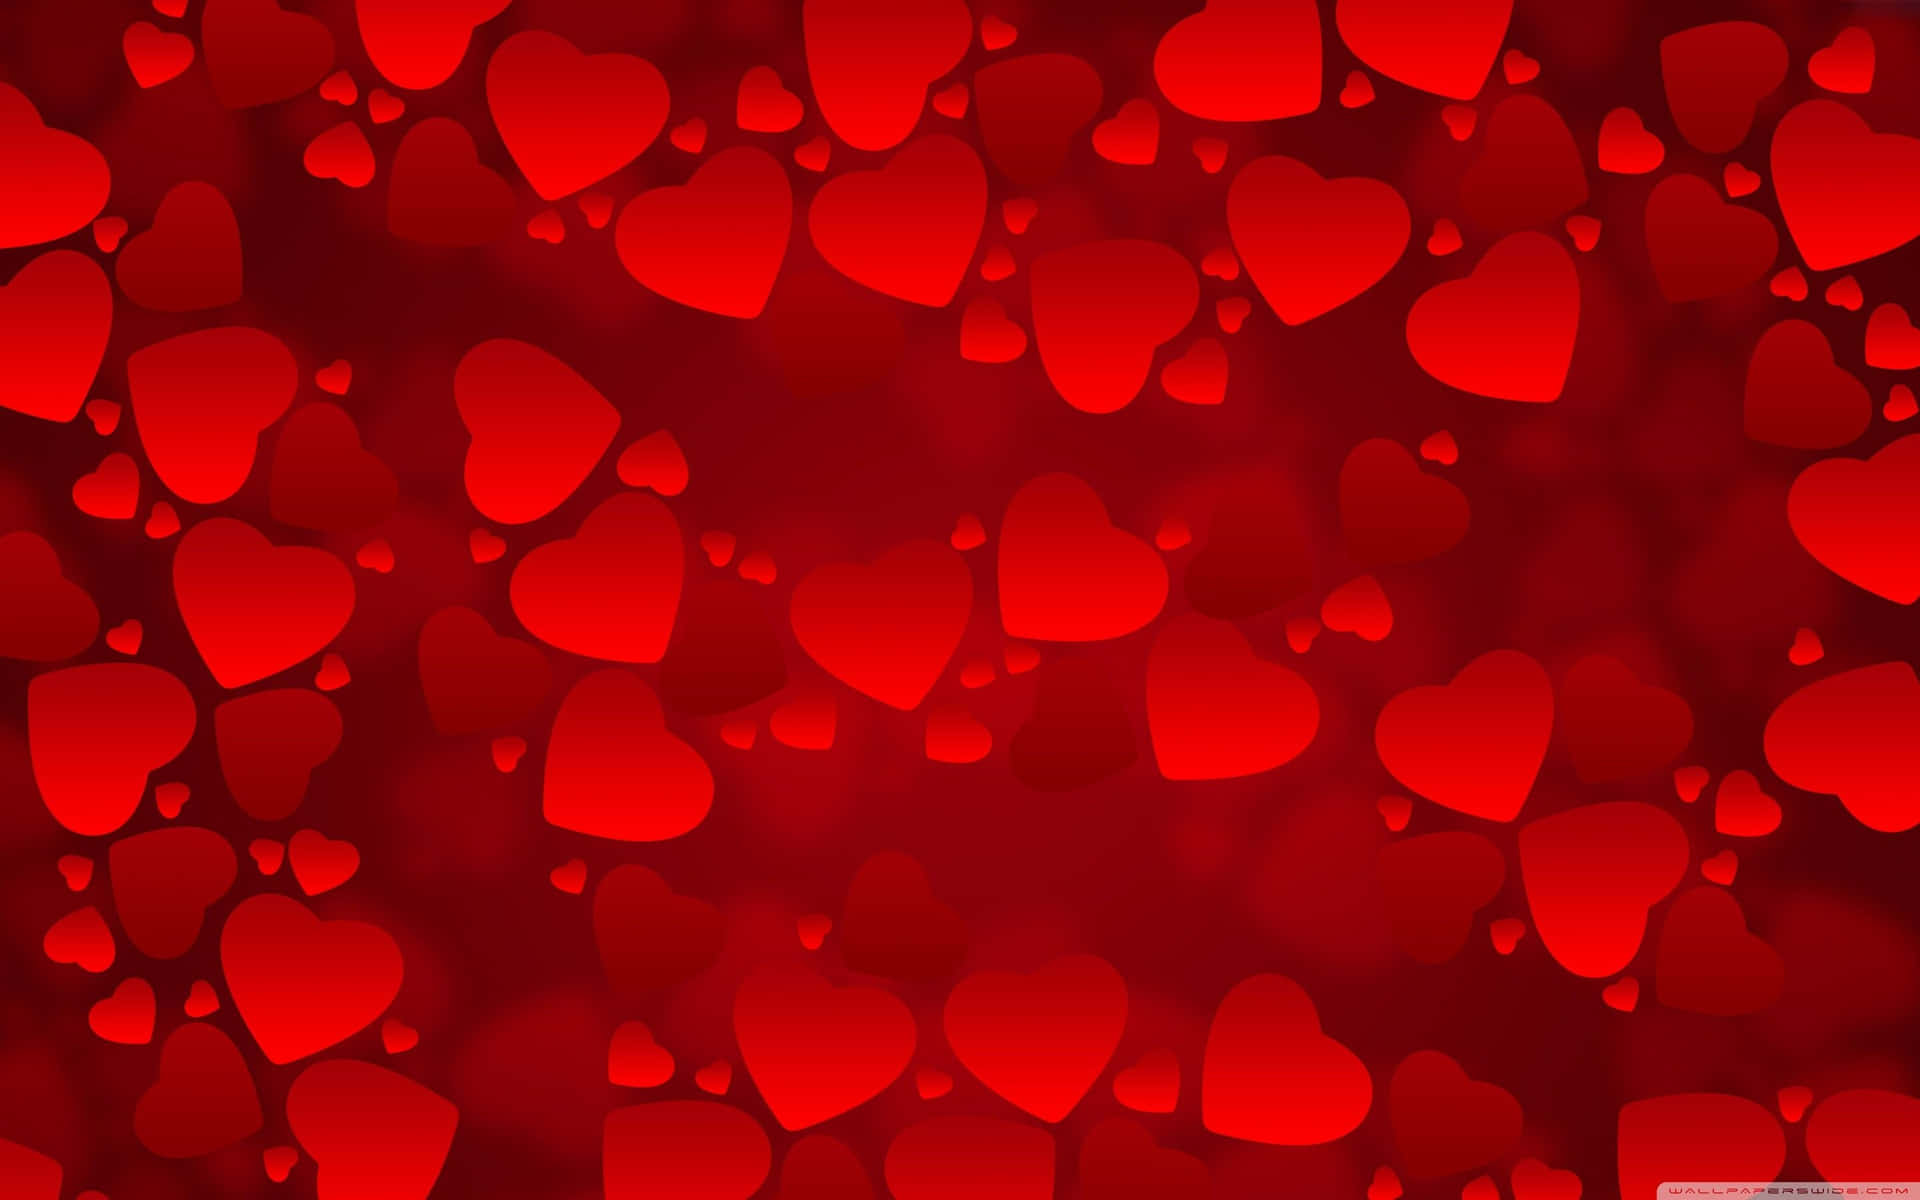 Red Hearts On A Red Background Wallpaper